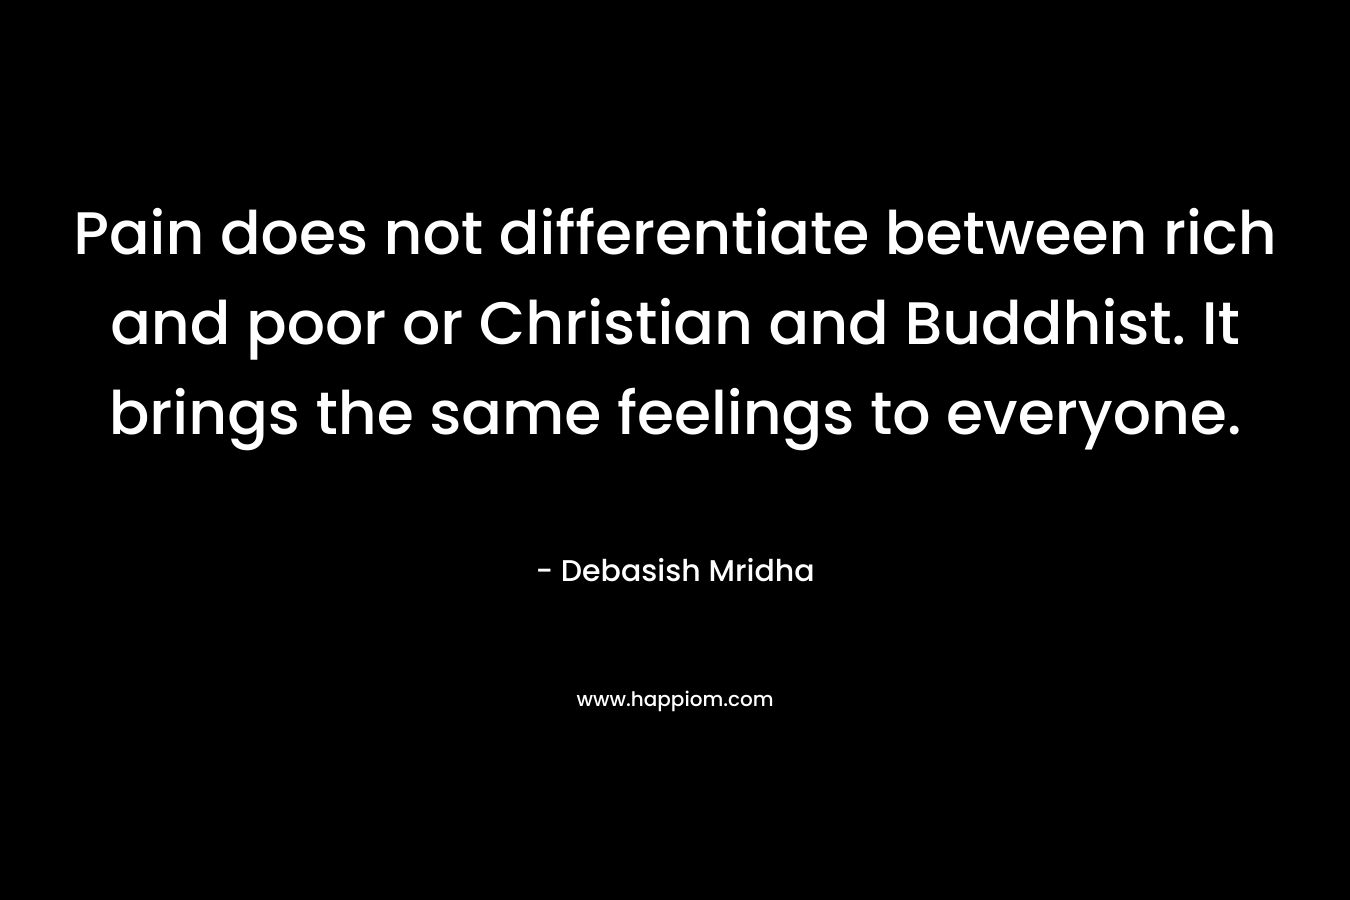 Pain does not differentiate between rich and poor or Christian and Buddhist. It brings the same feelings to everyone.